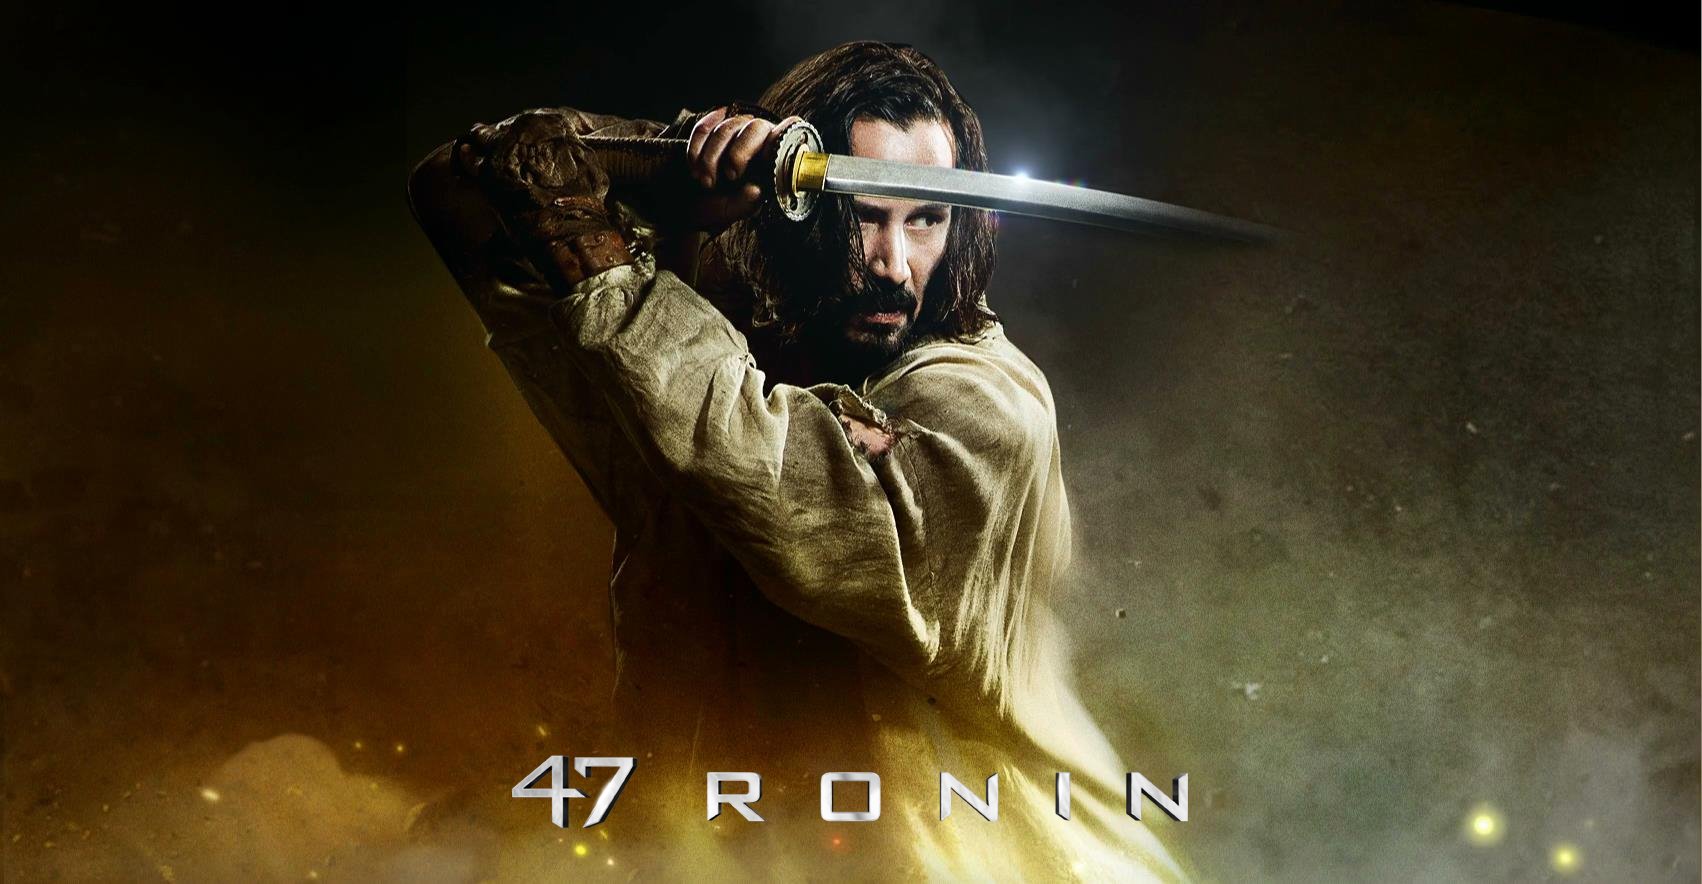 Ronin Is Loosely Based On The Historical Event Of